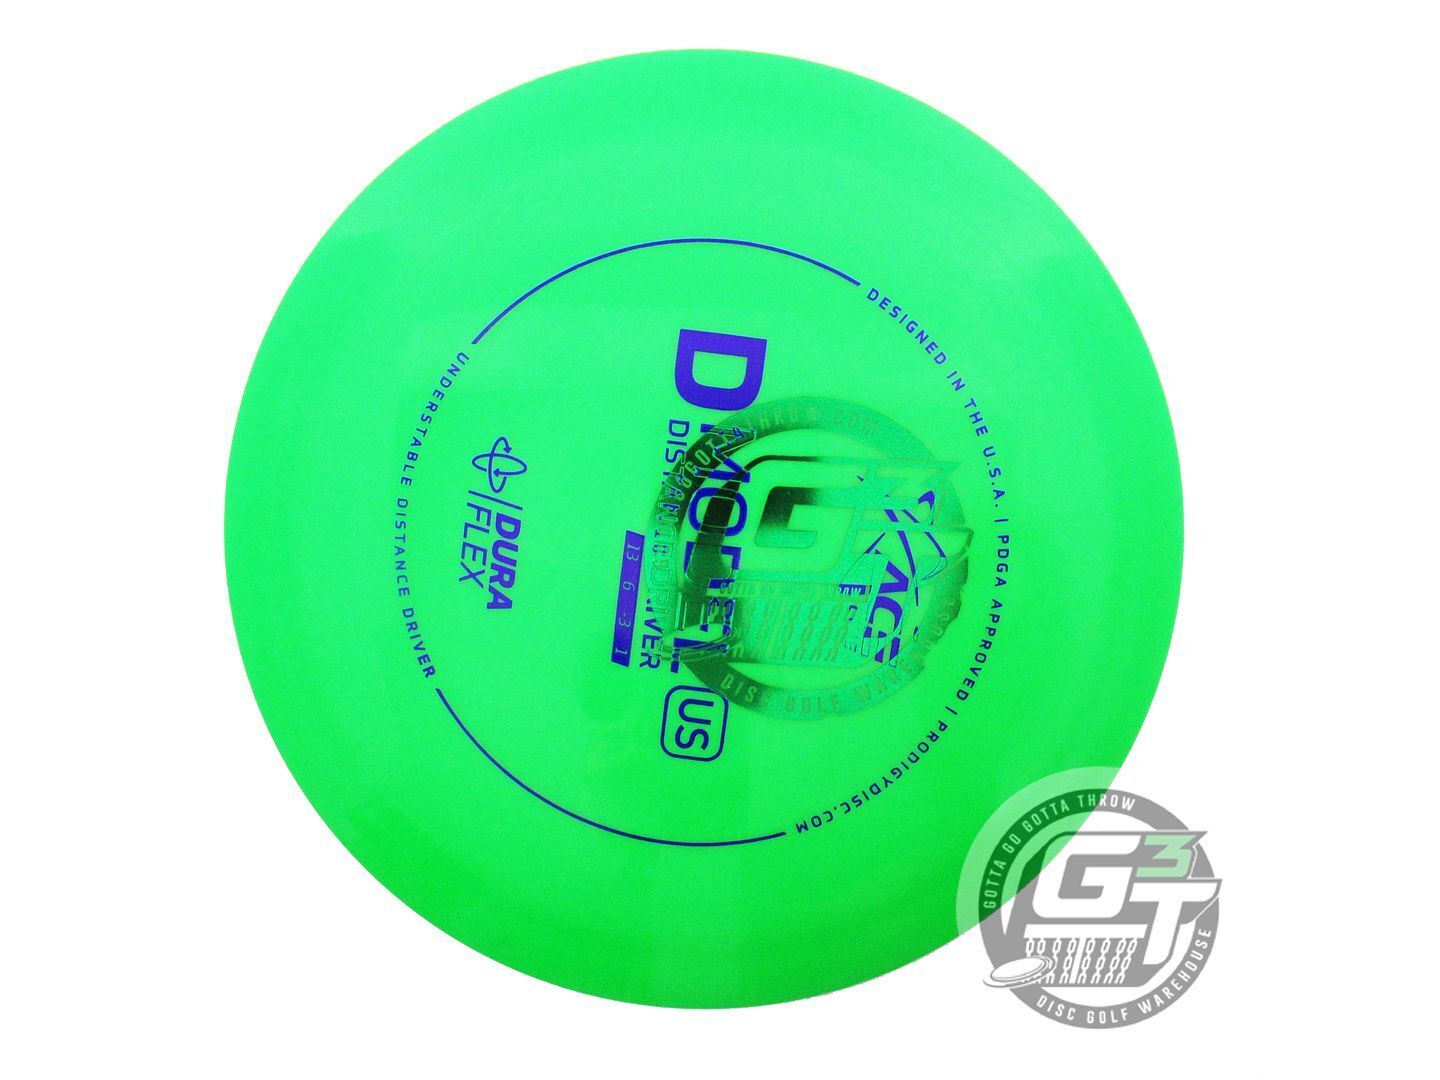 Prodigy Factory Second Ace Line DuraFlex D Model US Distance Driver Golf Disc (Individually Listed)